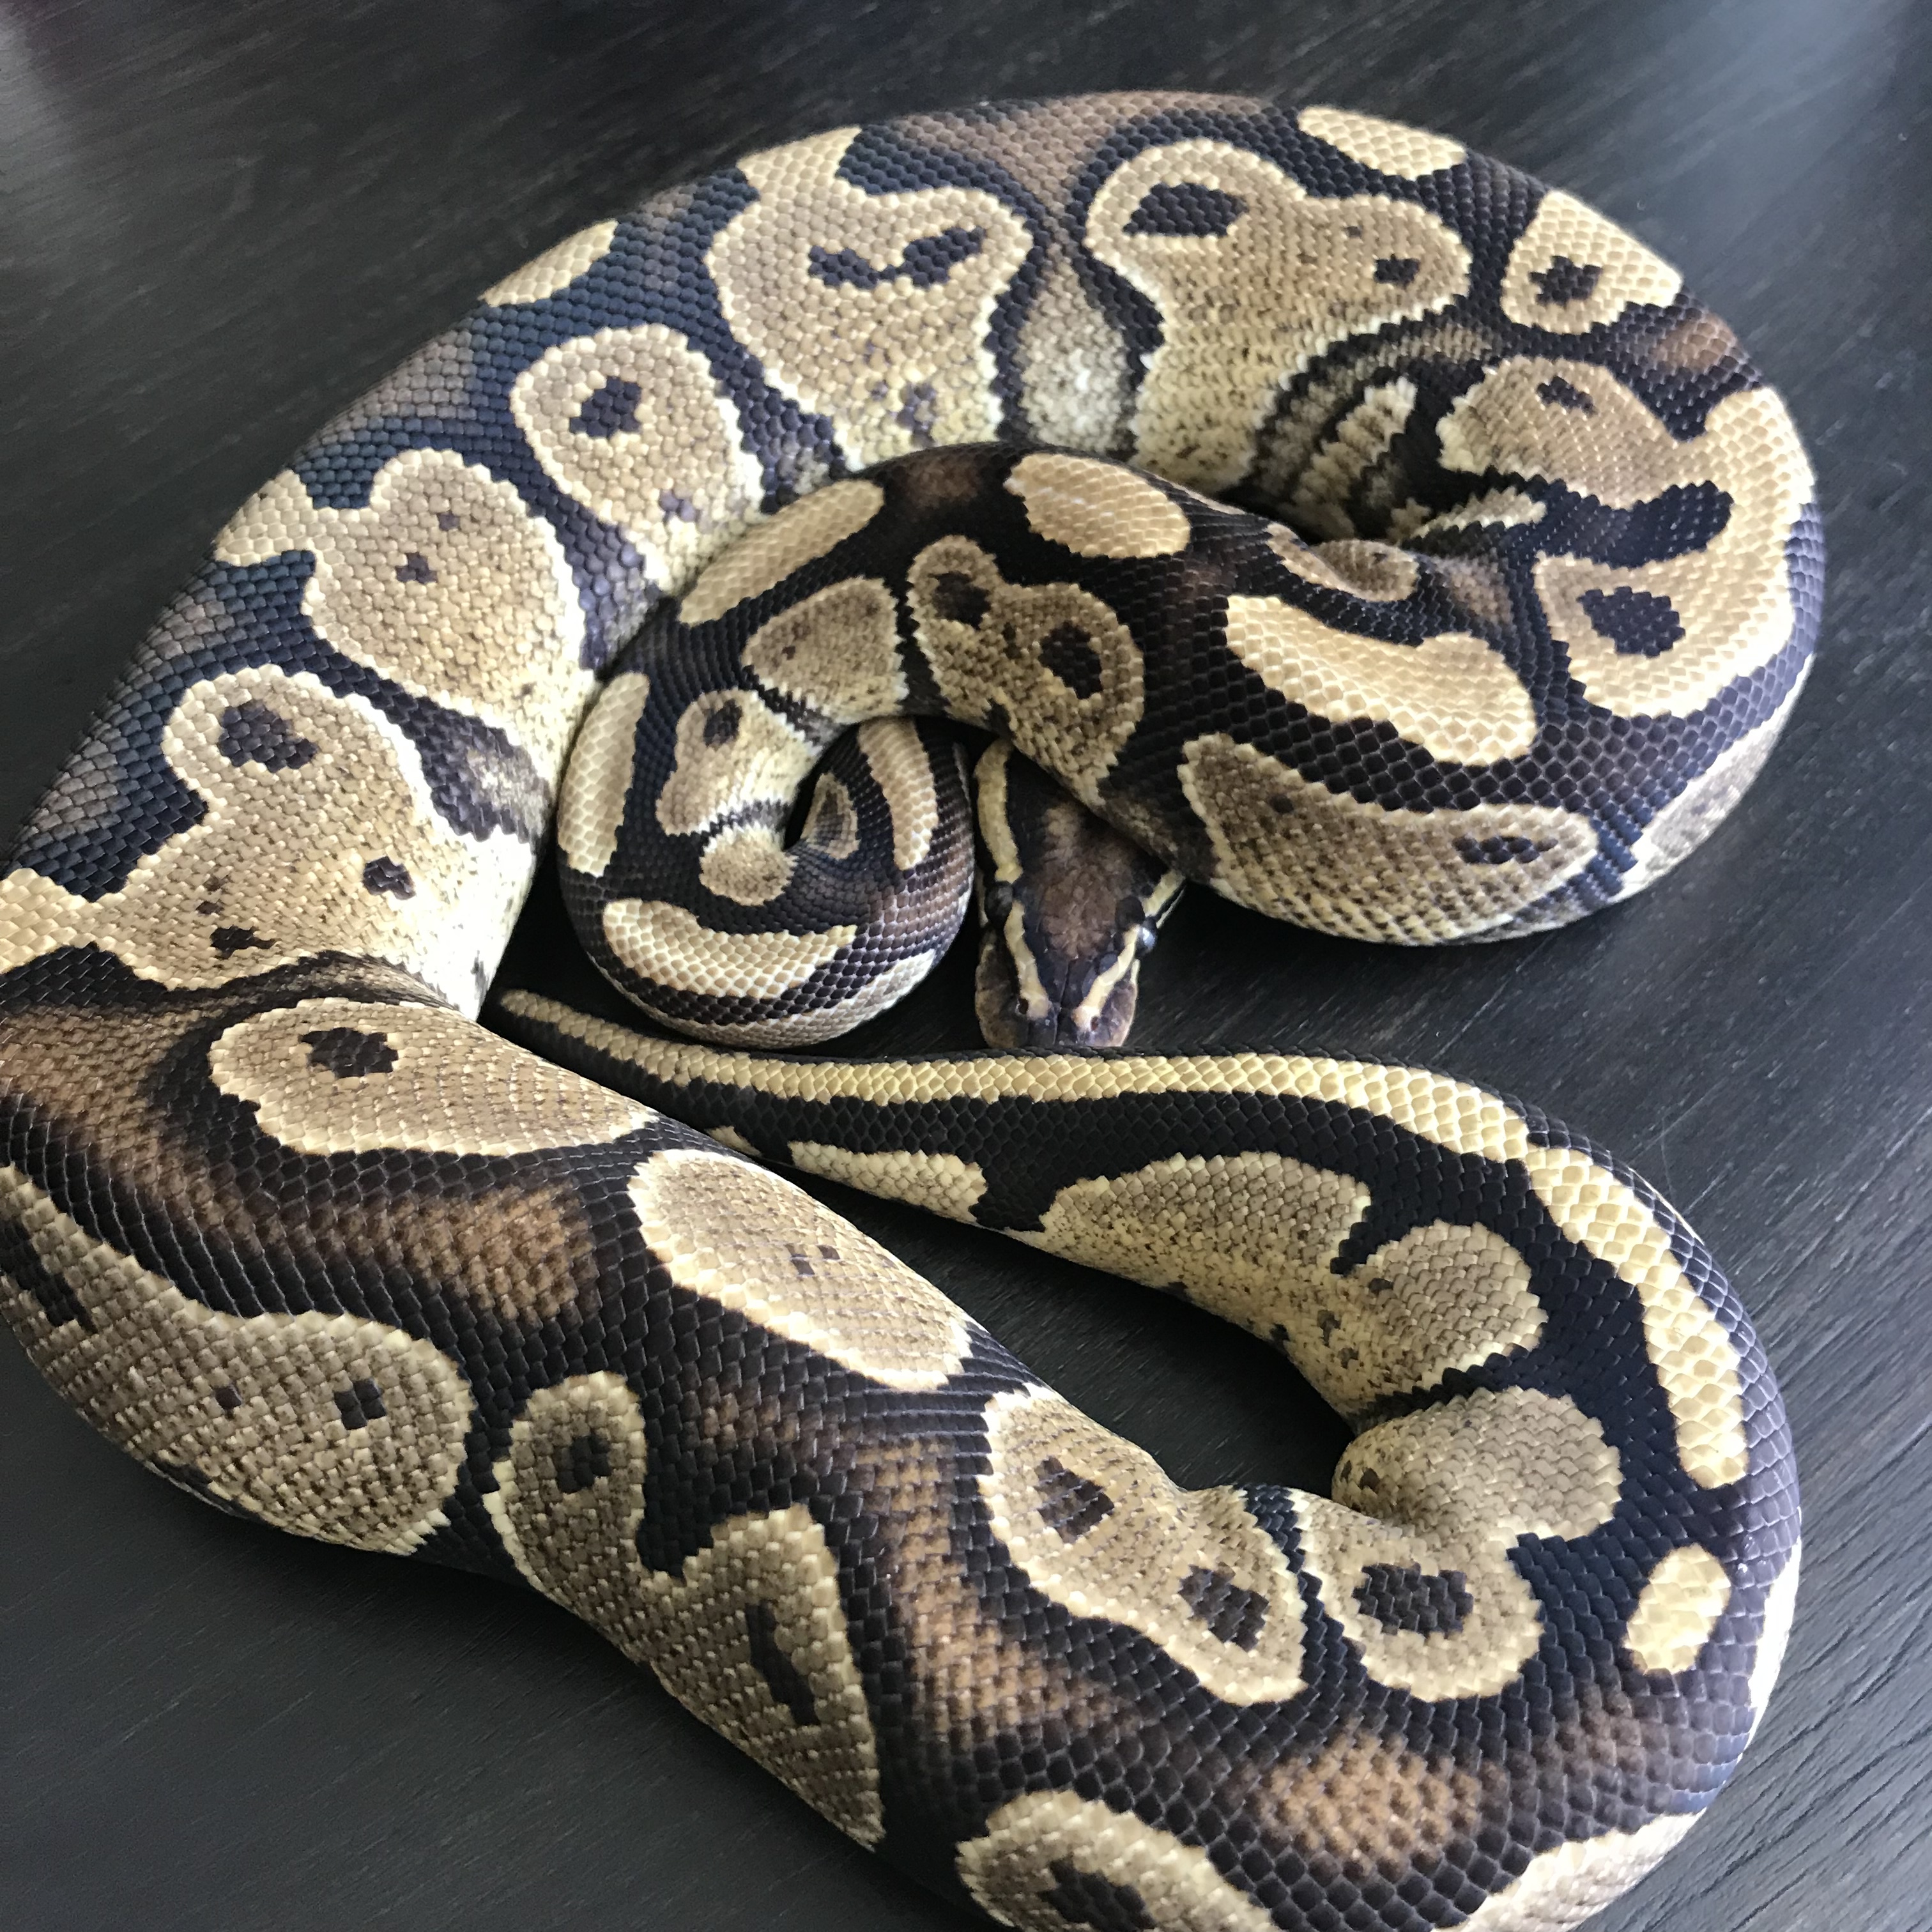 Sulfur Ball Python by Texas Belle Exotics